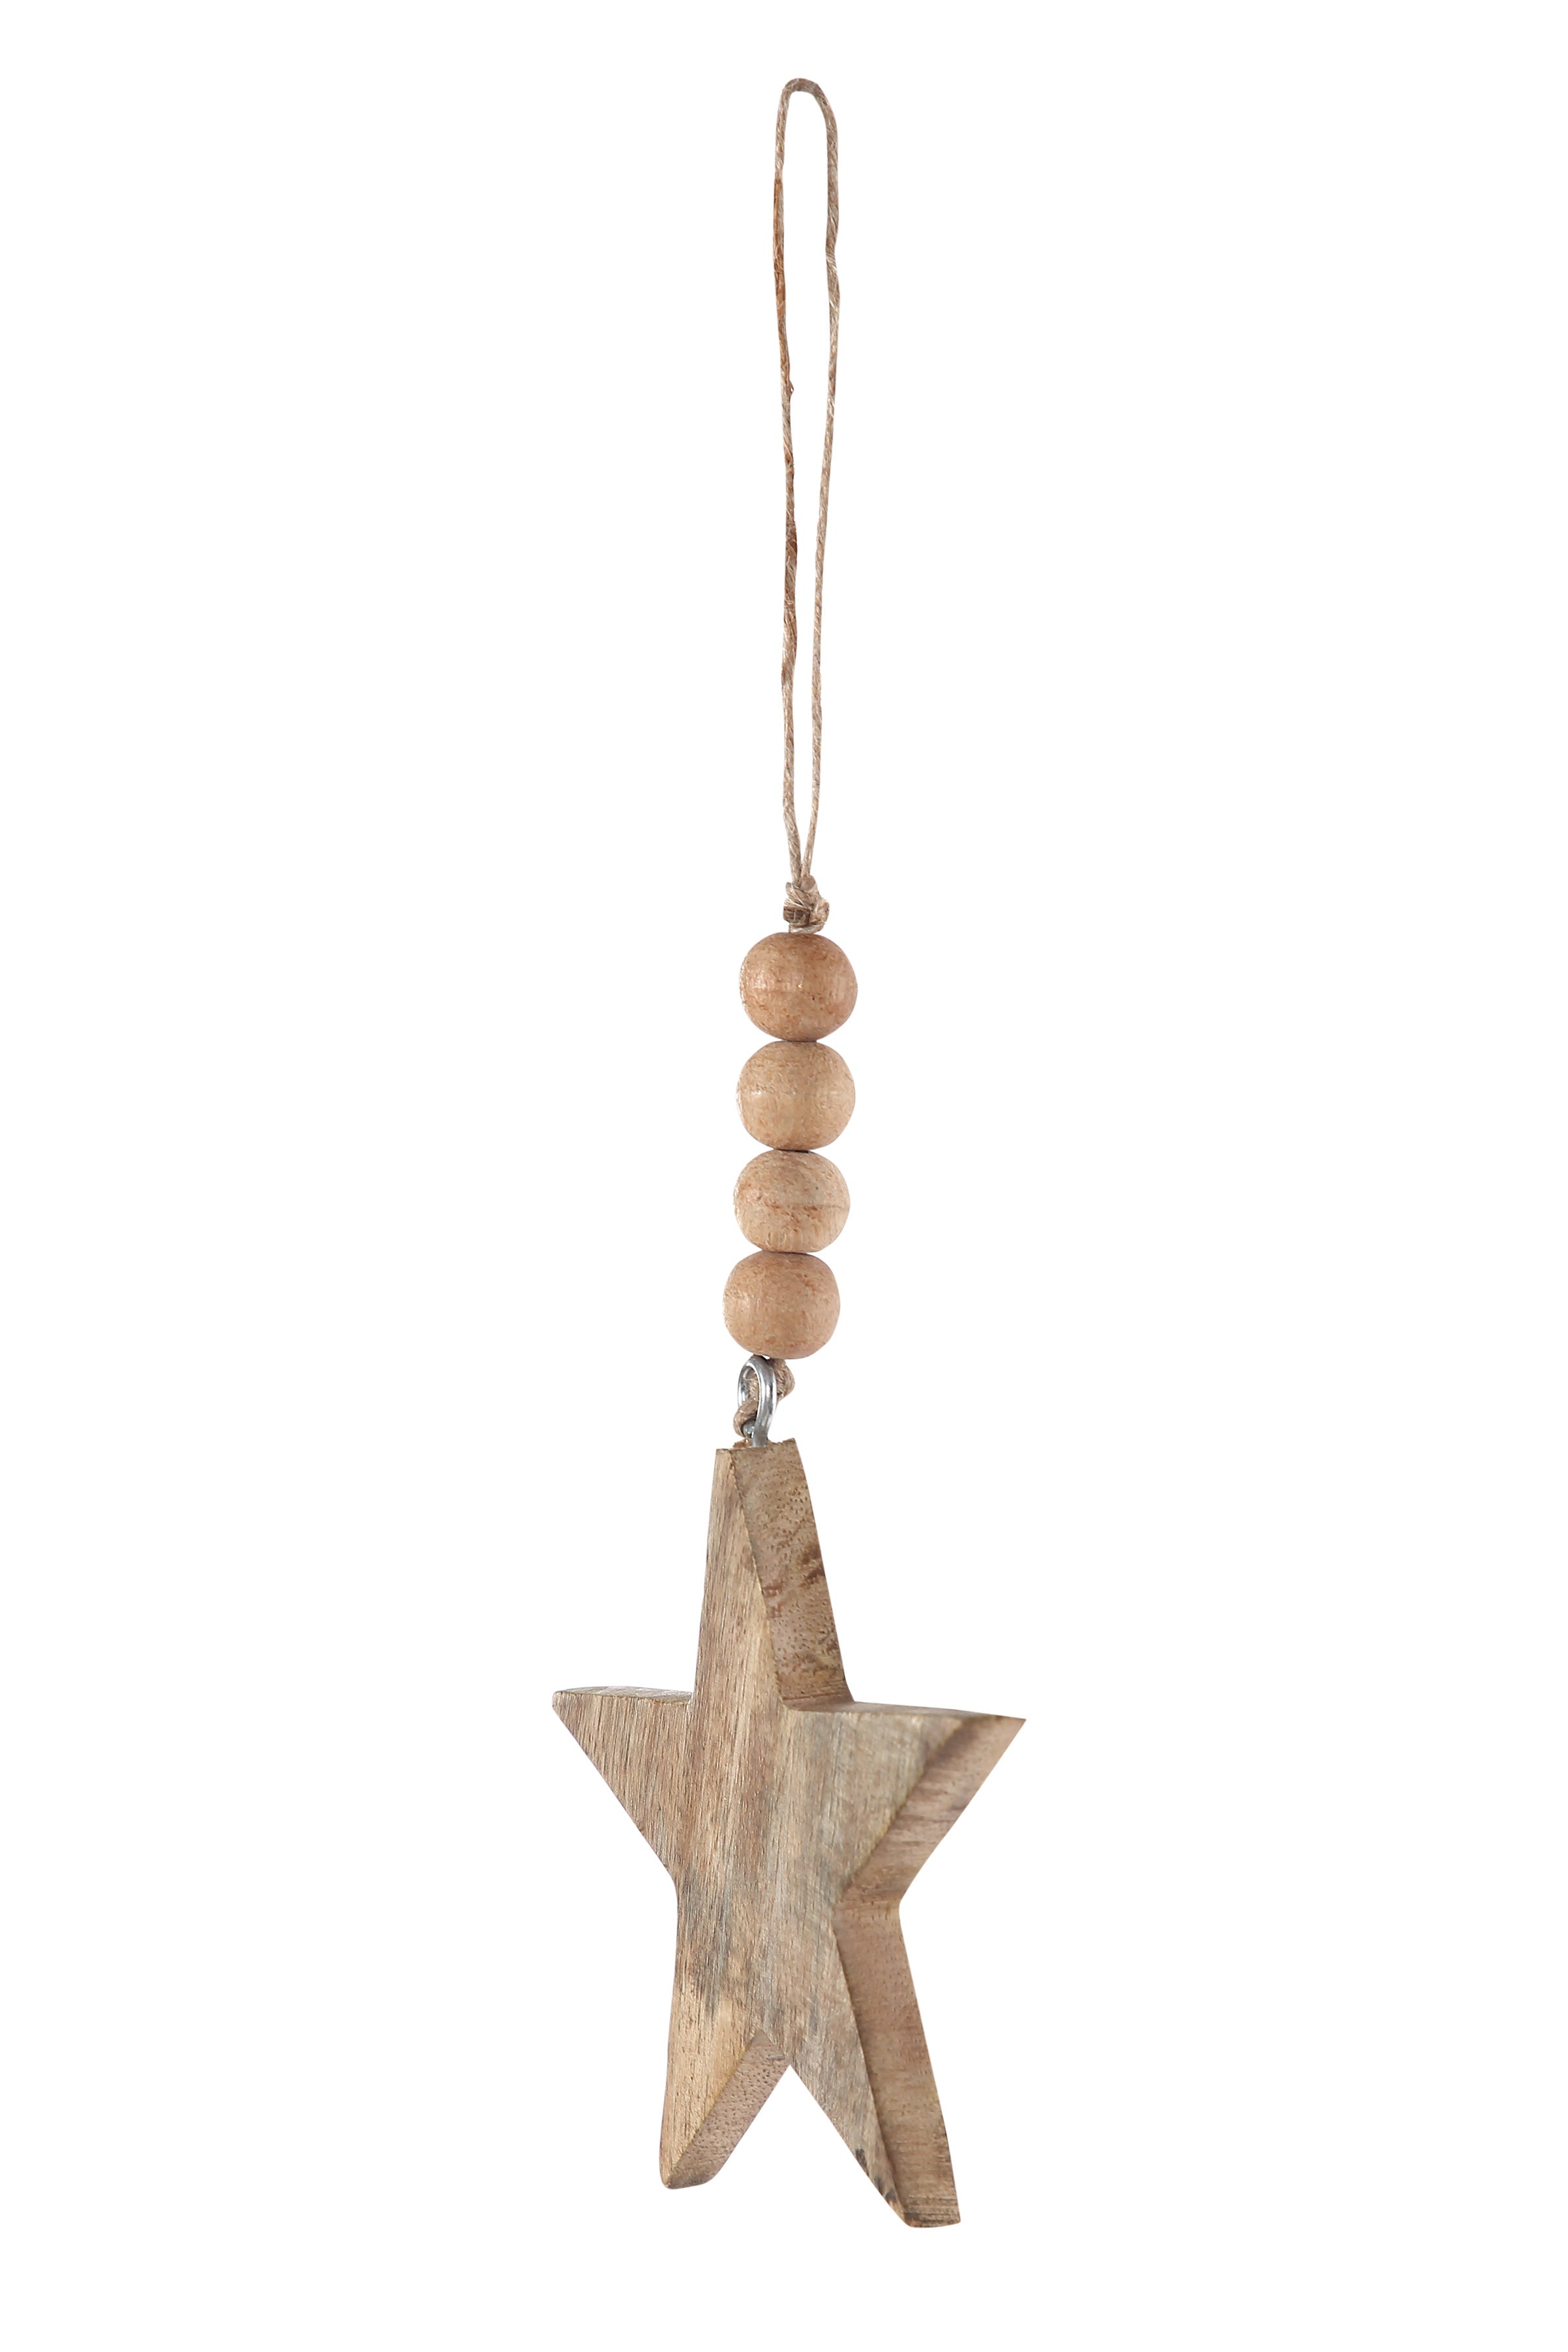 Handmade Wood Christmas Ornament - Star 10 inches (Set of 3)